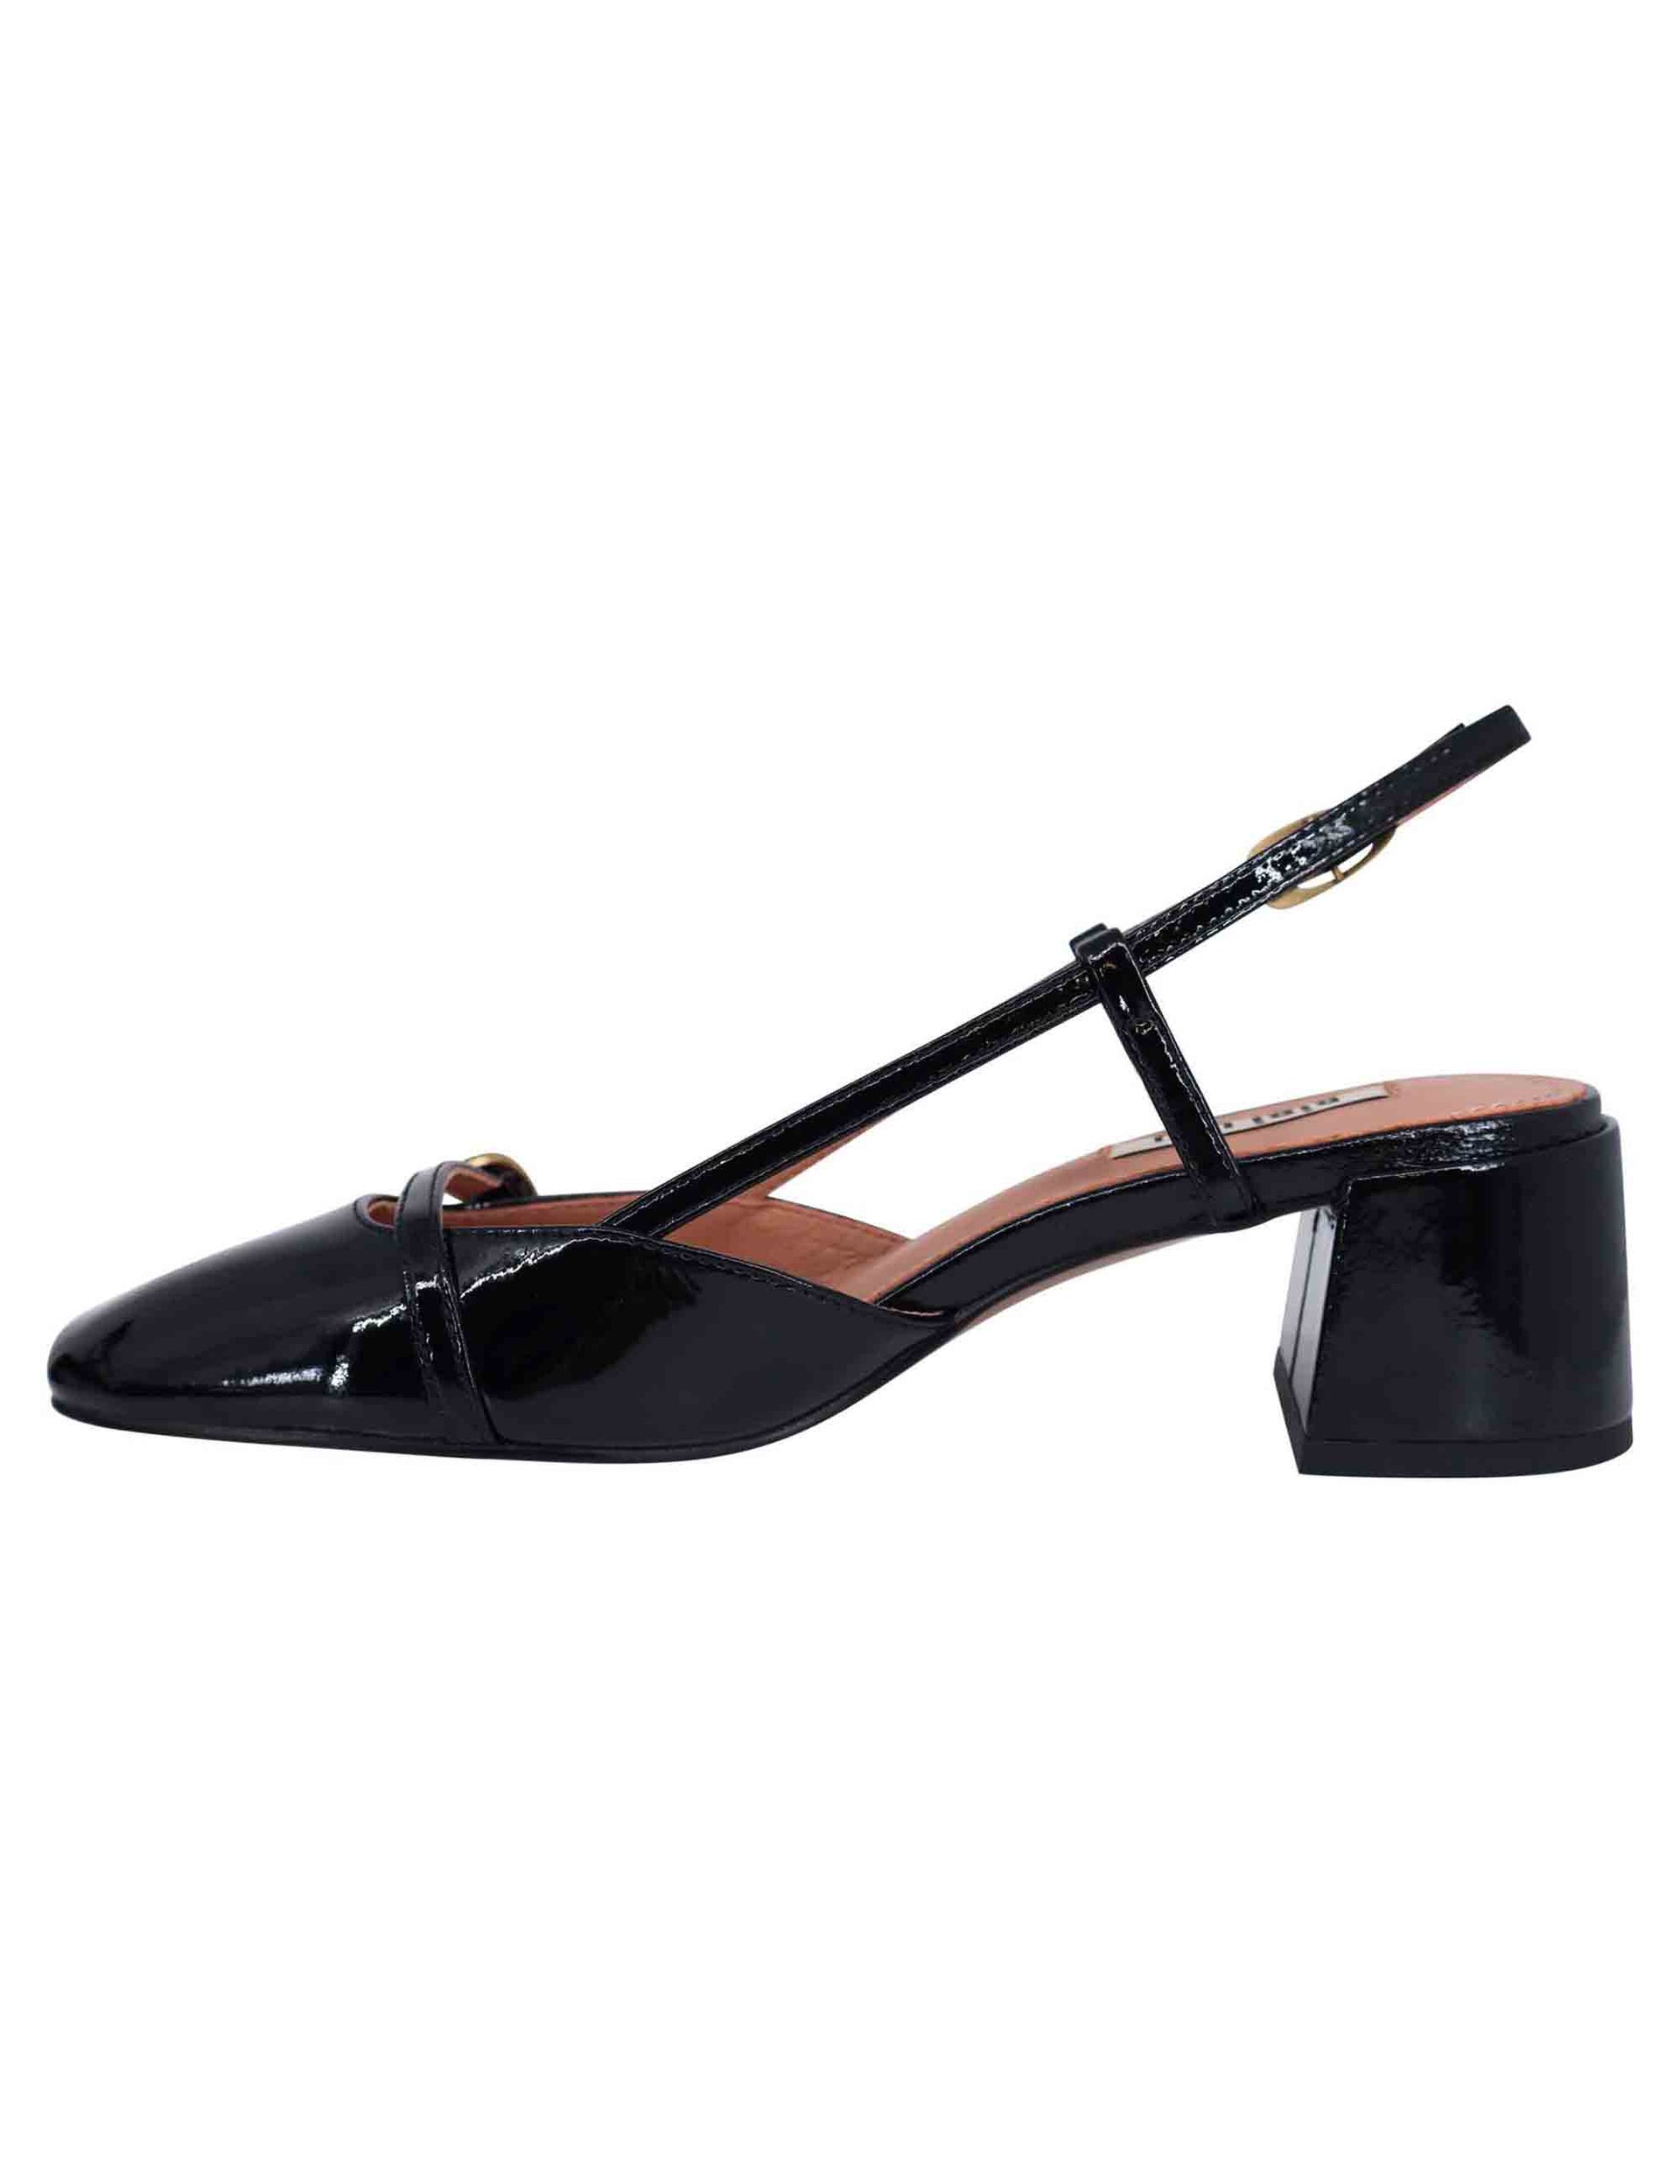 Women's black patent slingback pumps with Patty buckle